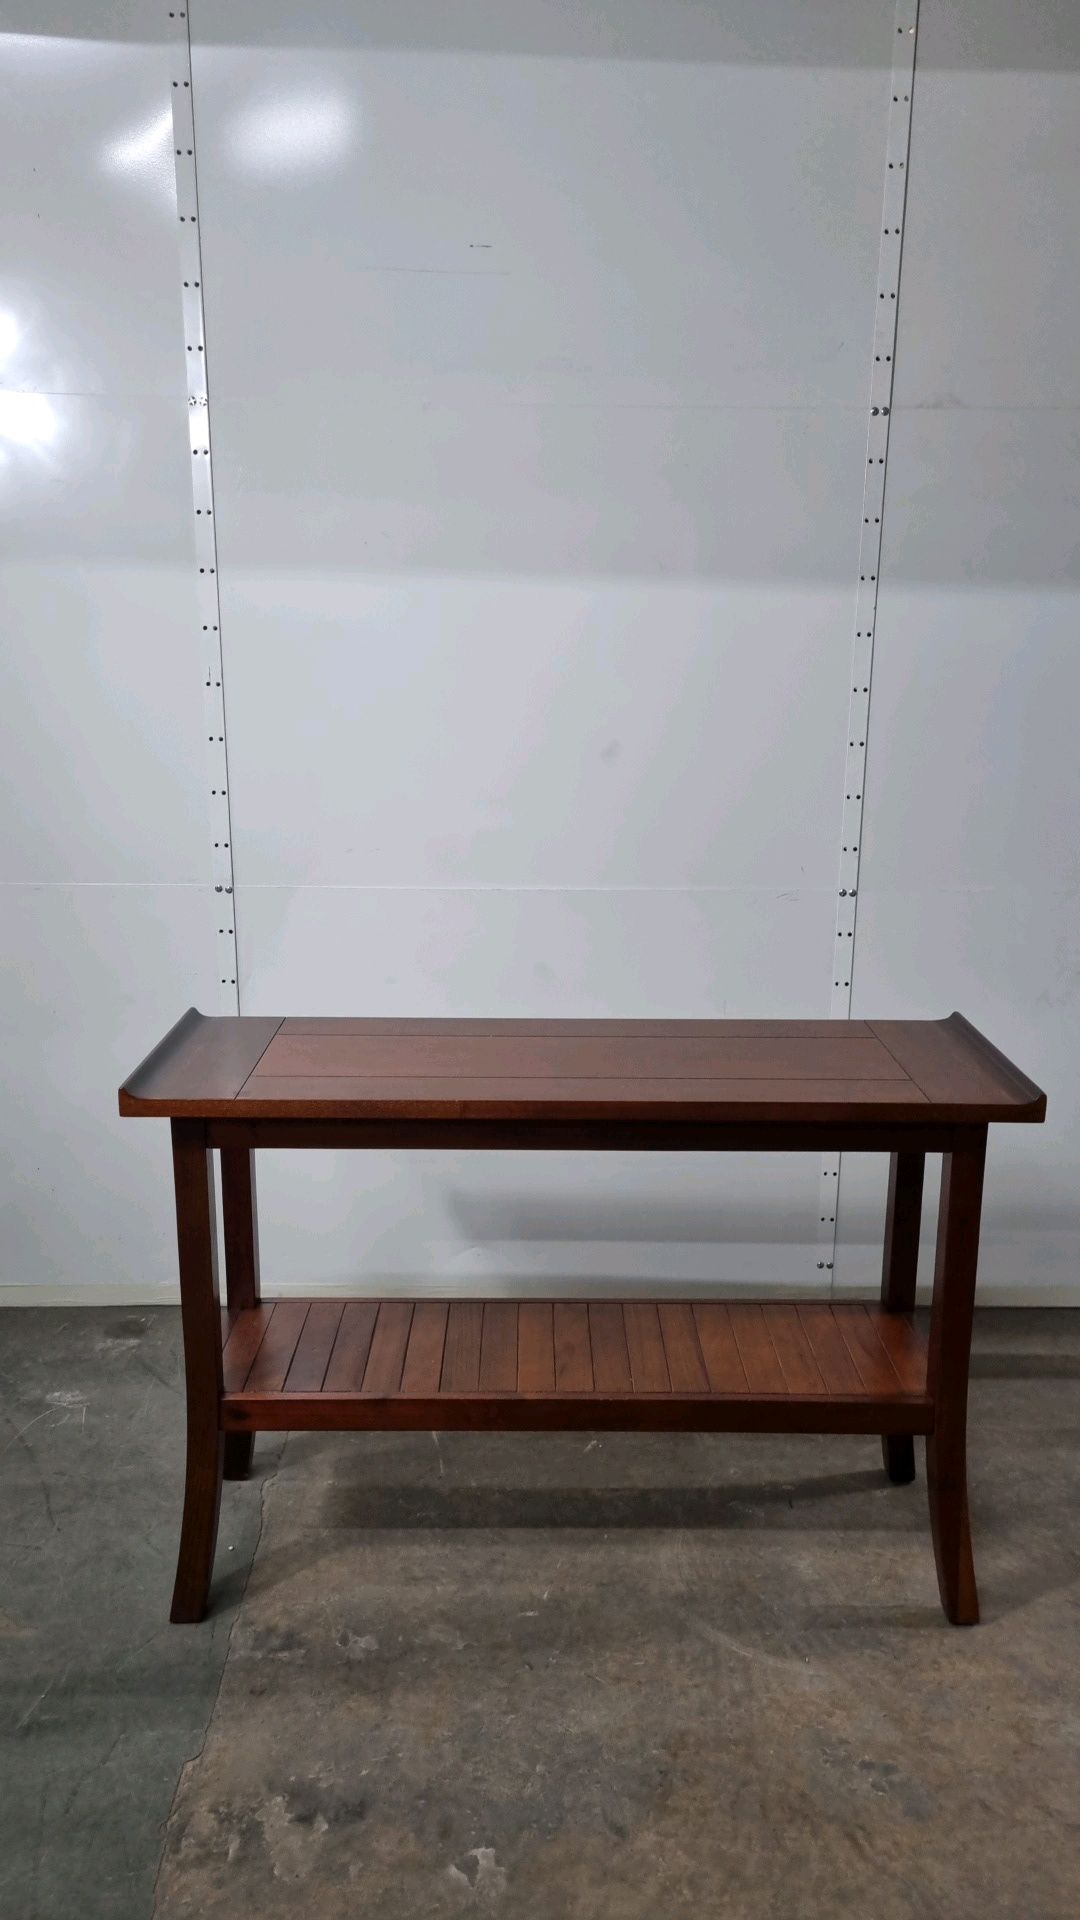 Mahogany Side Table With Shelf 1200mm x 790mm x 400mm